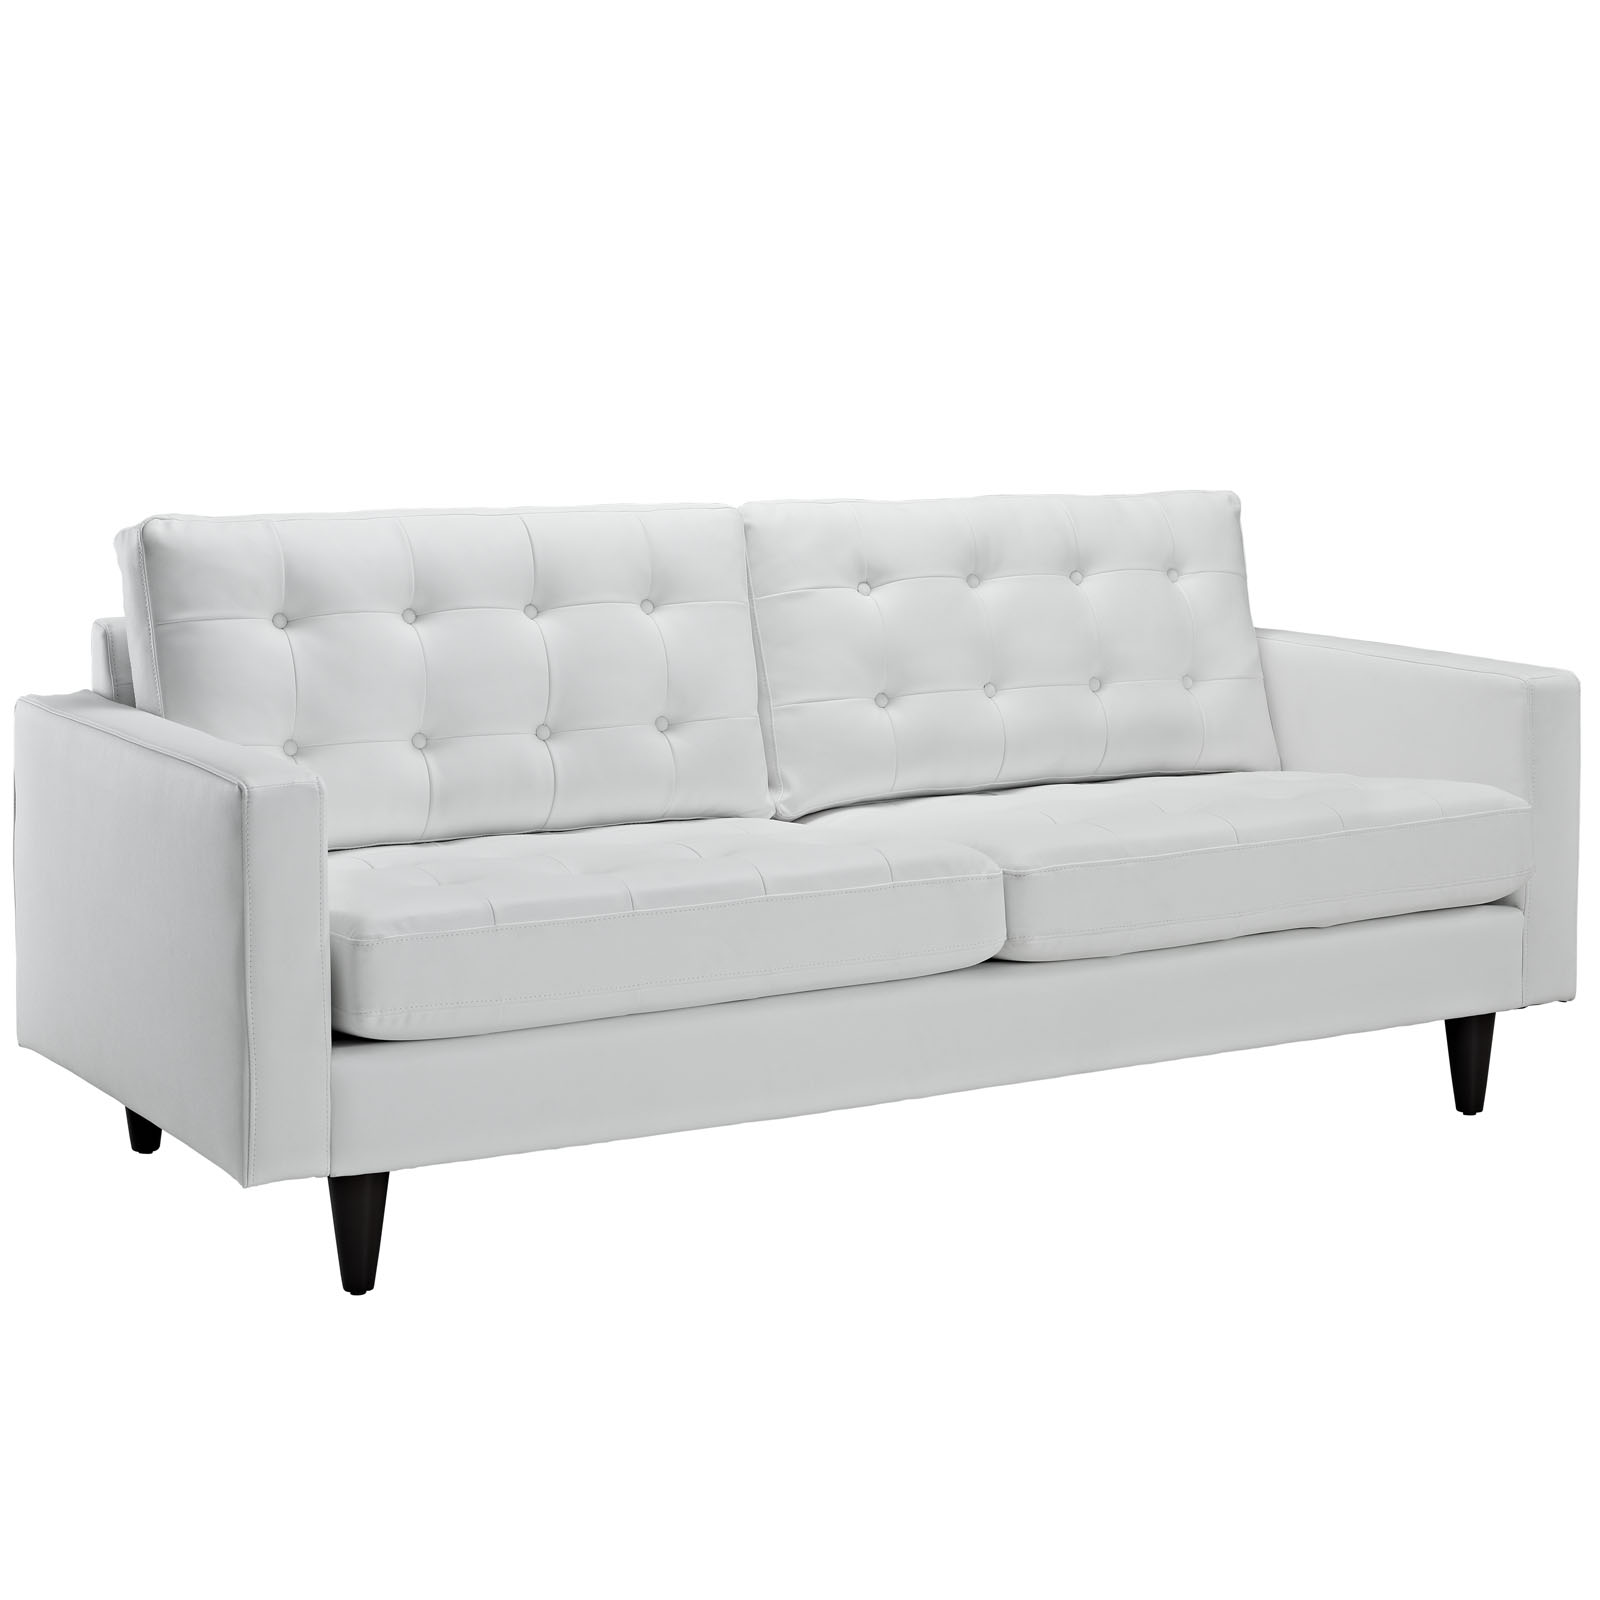 Lhd 1010 Whi Sofa, Ikea White Leather Couch